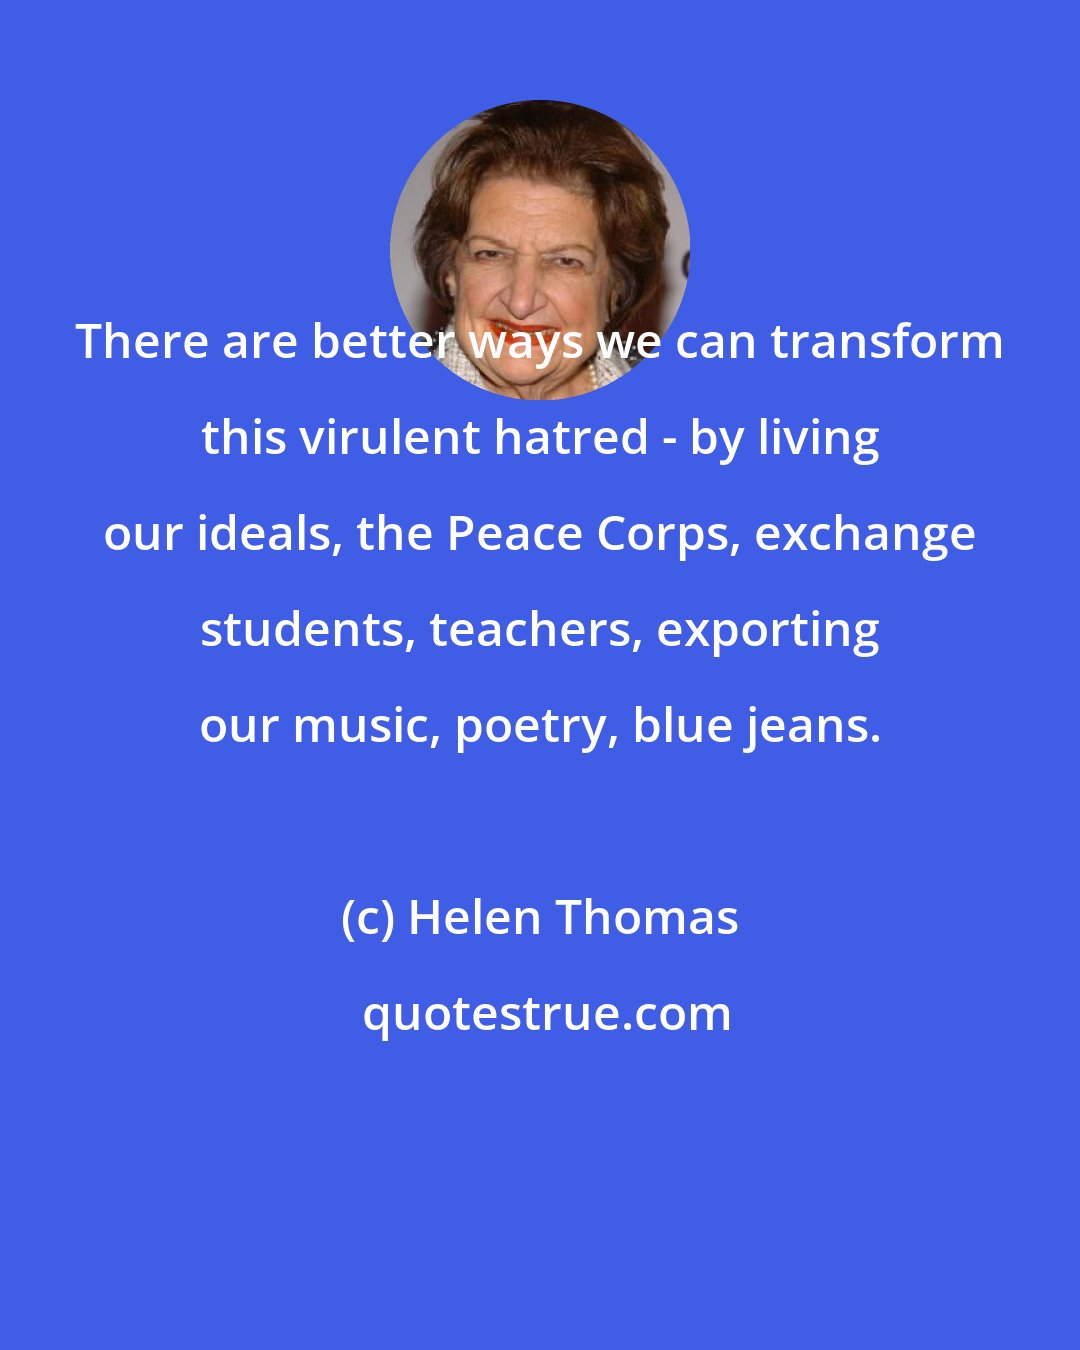 Helen Thomas: There are better ways we can transform this virulent hatred - by living our ideals, the Peace Corps, exchange students, teachers, exporting our music, poetry, blue jeans.